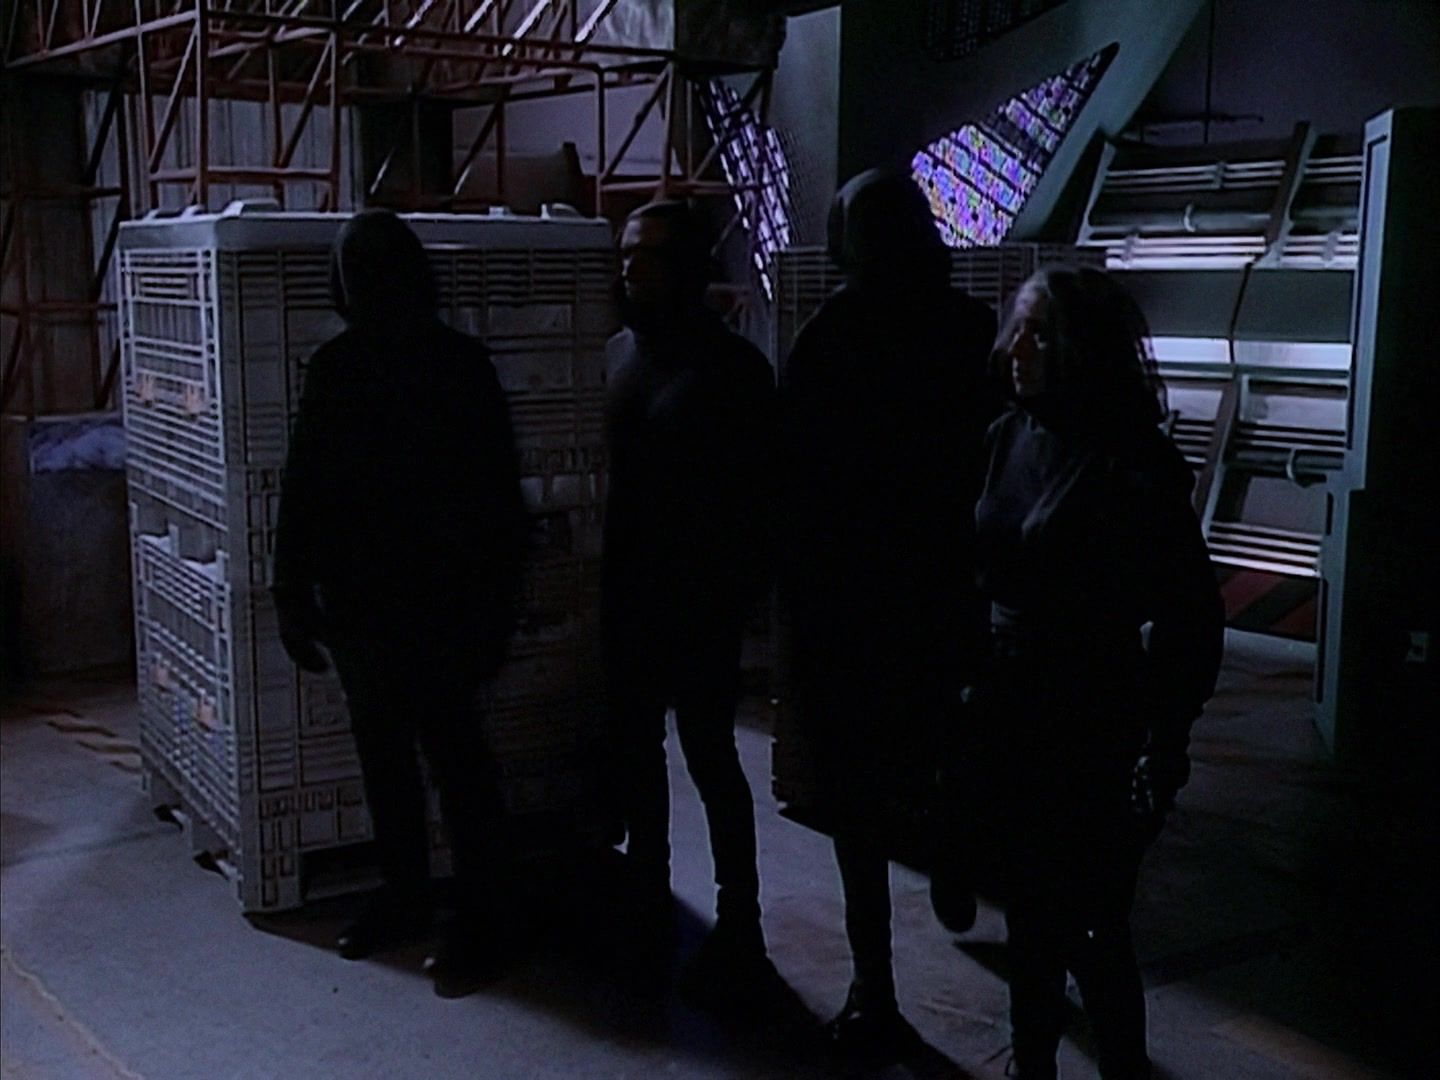 Four black clad figures lurk next to containers.